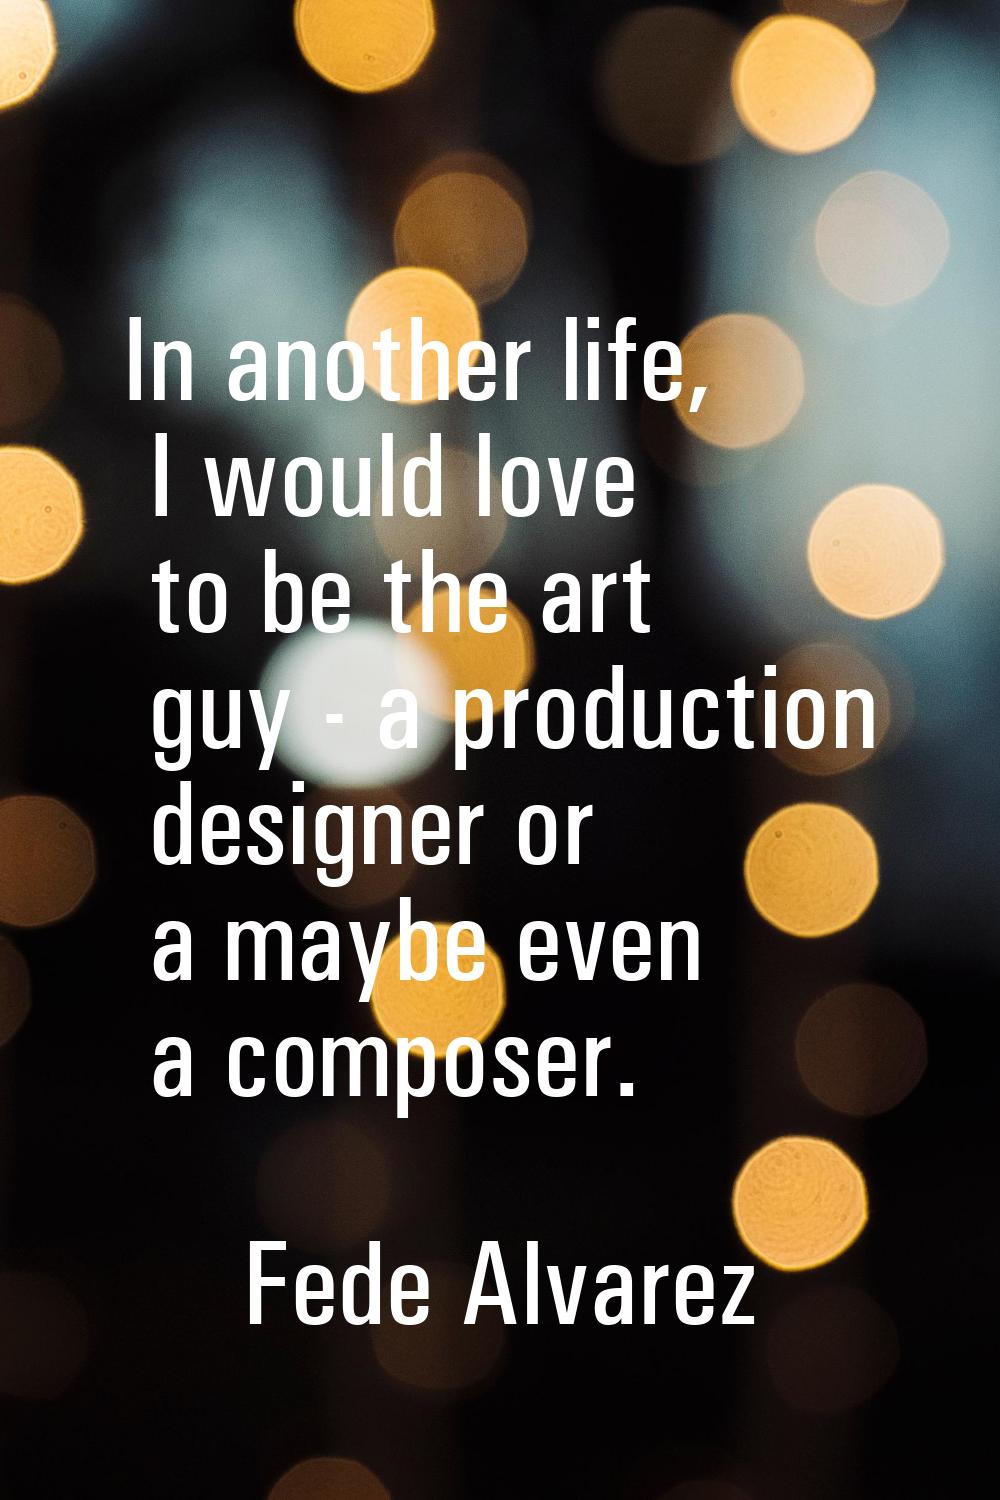 In another life, I would love to be the art guy - a production designer or a maybe even a composer.